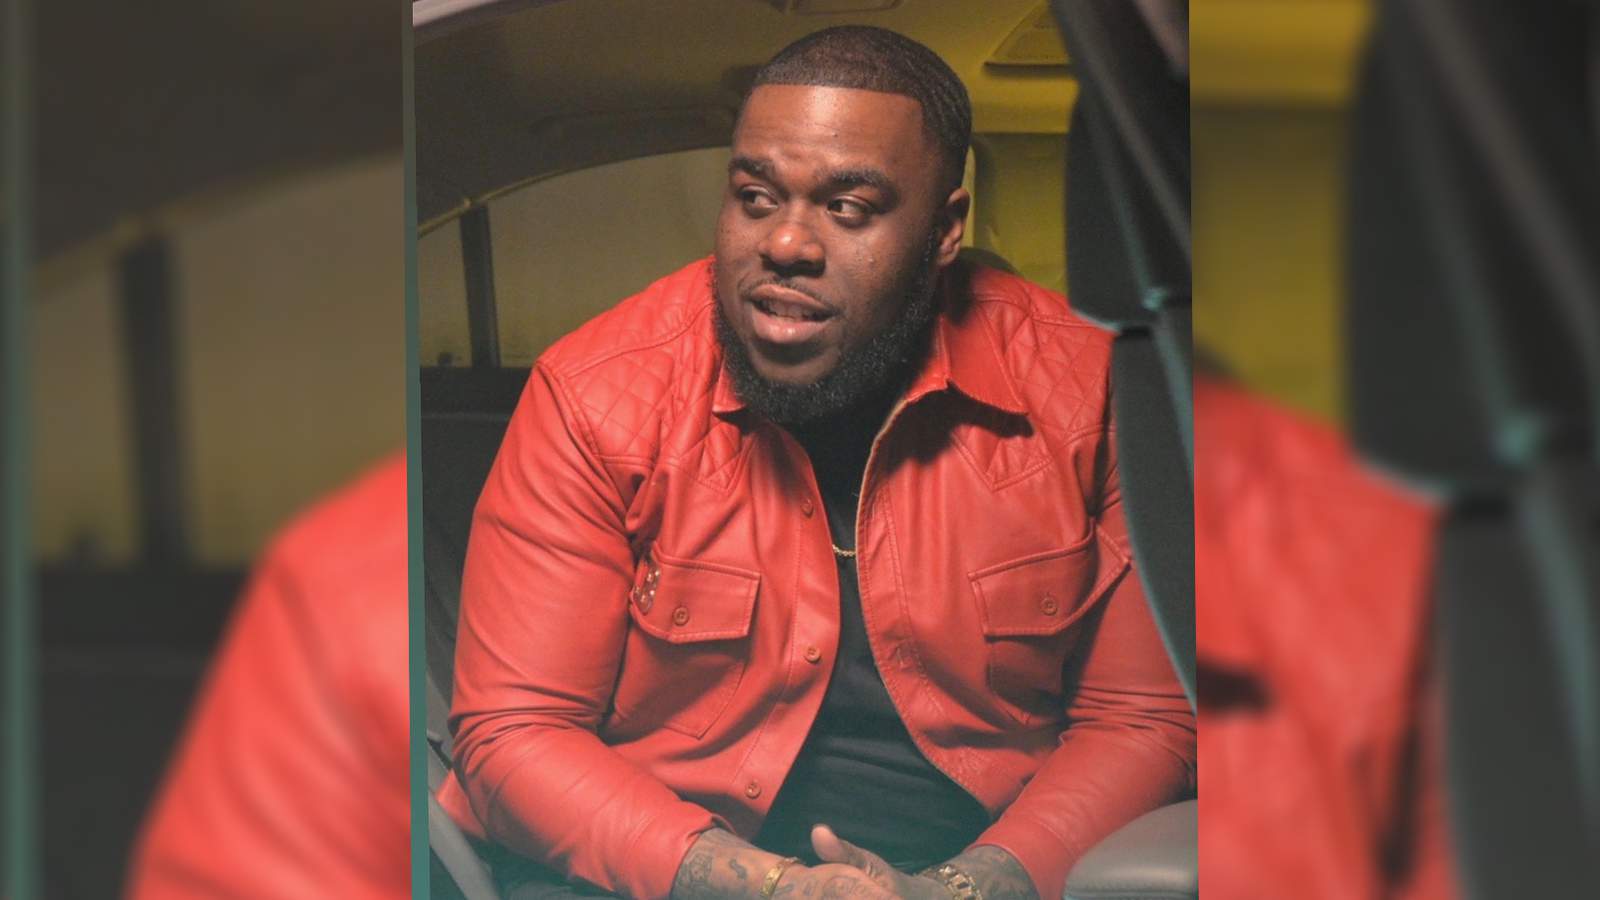 Reward offered for info about local rapper’s slaying 3 years ago